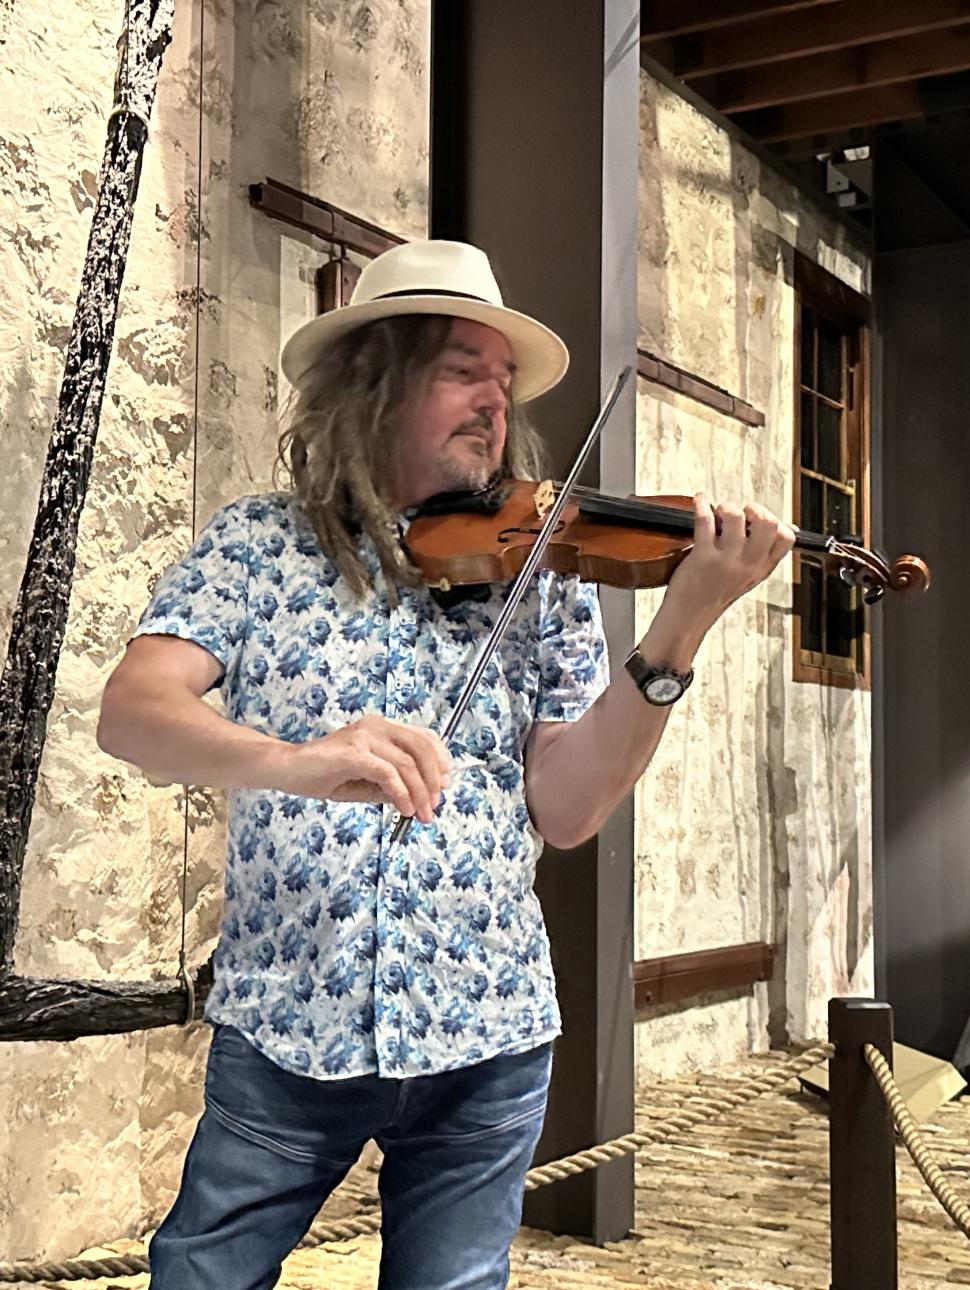 An adult person with a hat stands with a violin in a position to play the instrument In the background is an anchor and part of a shipwreck